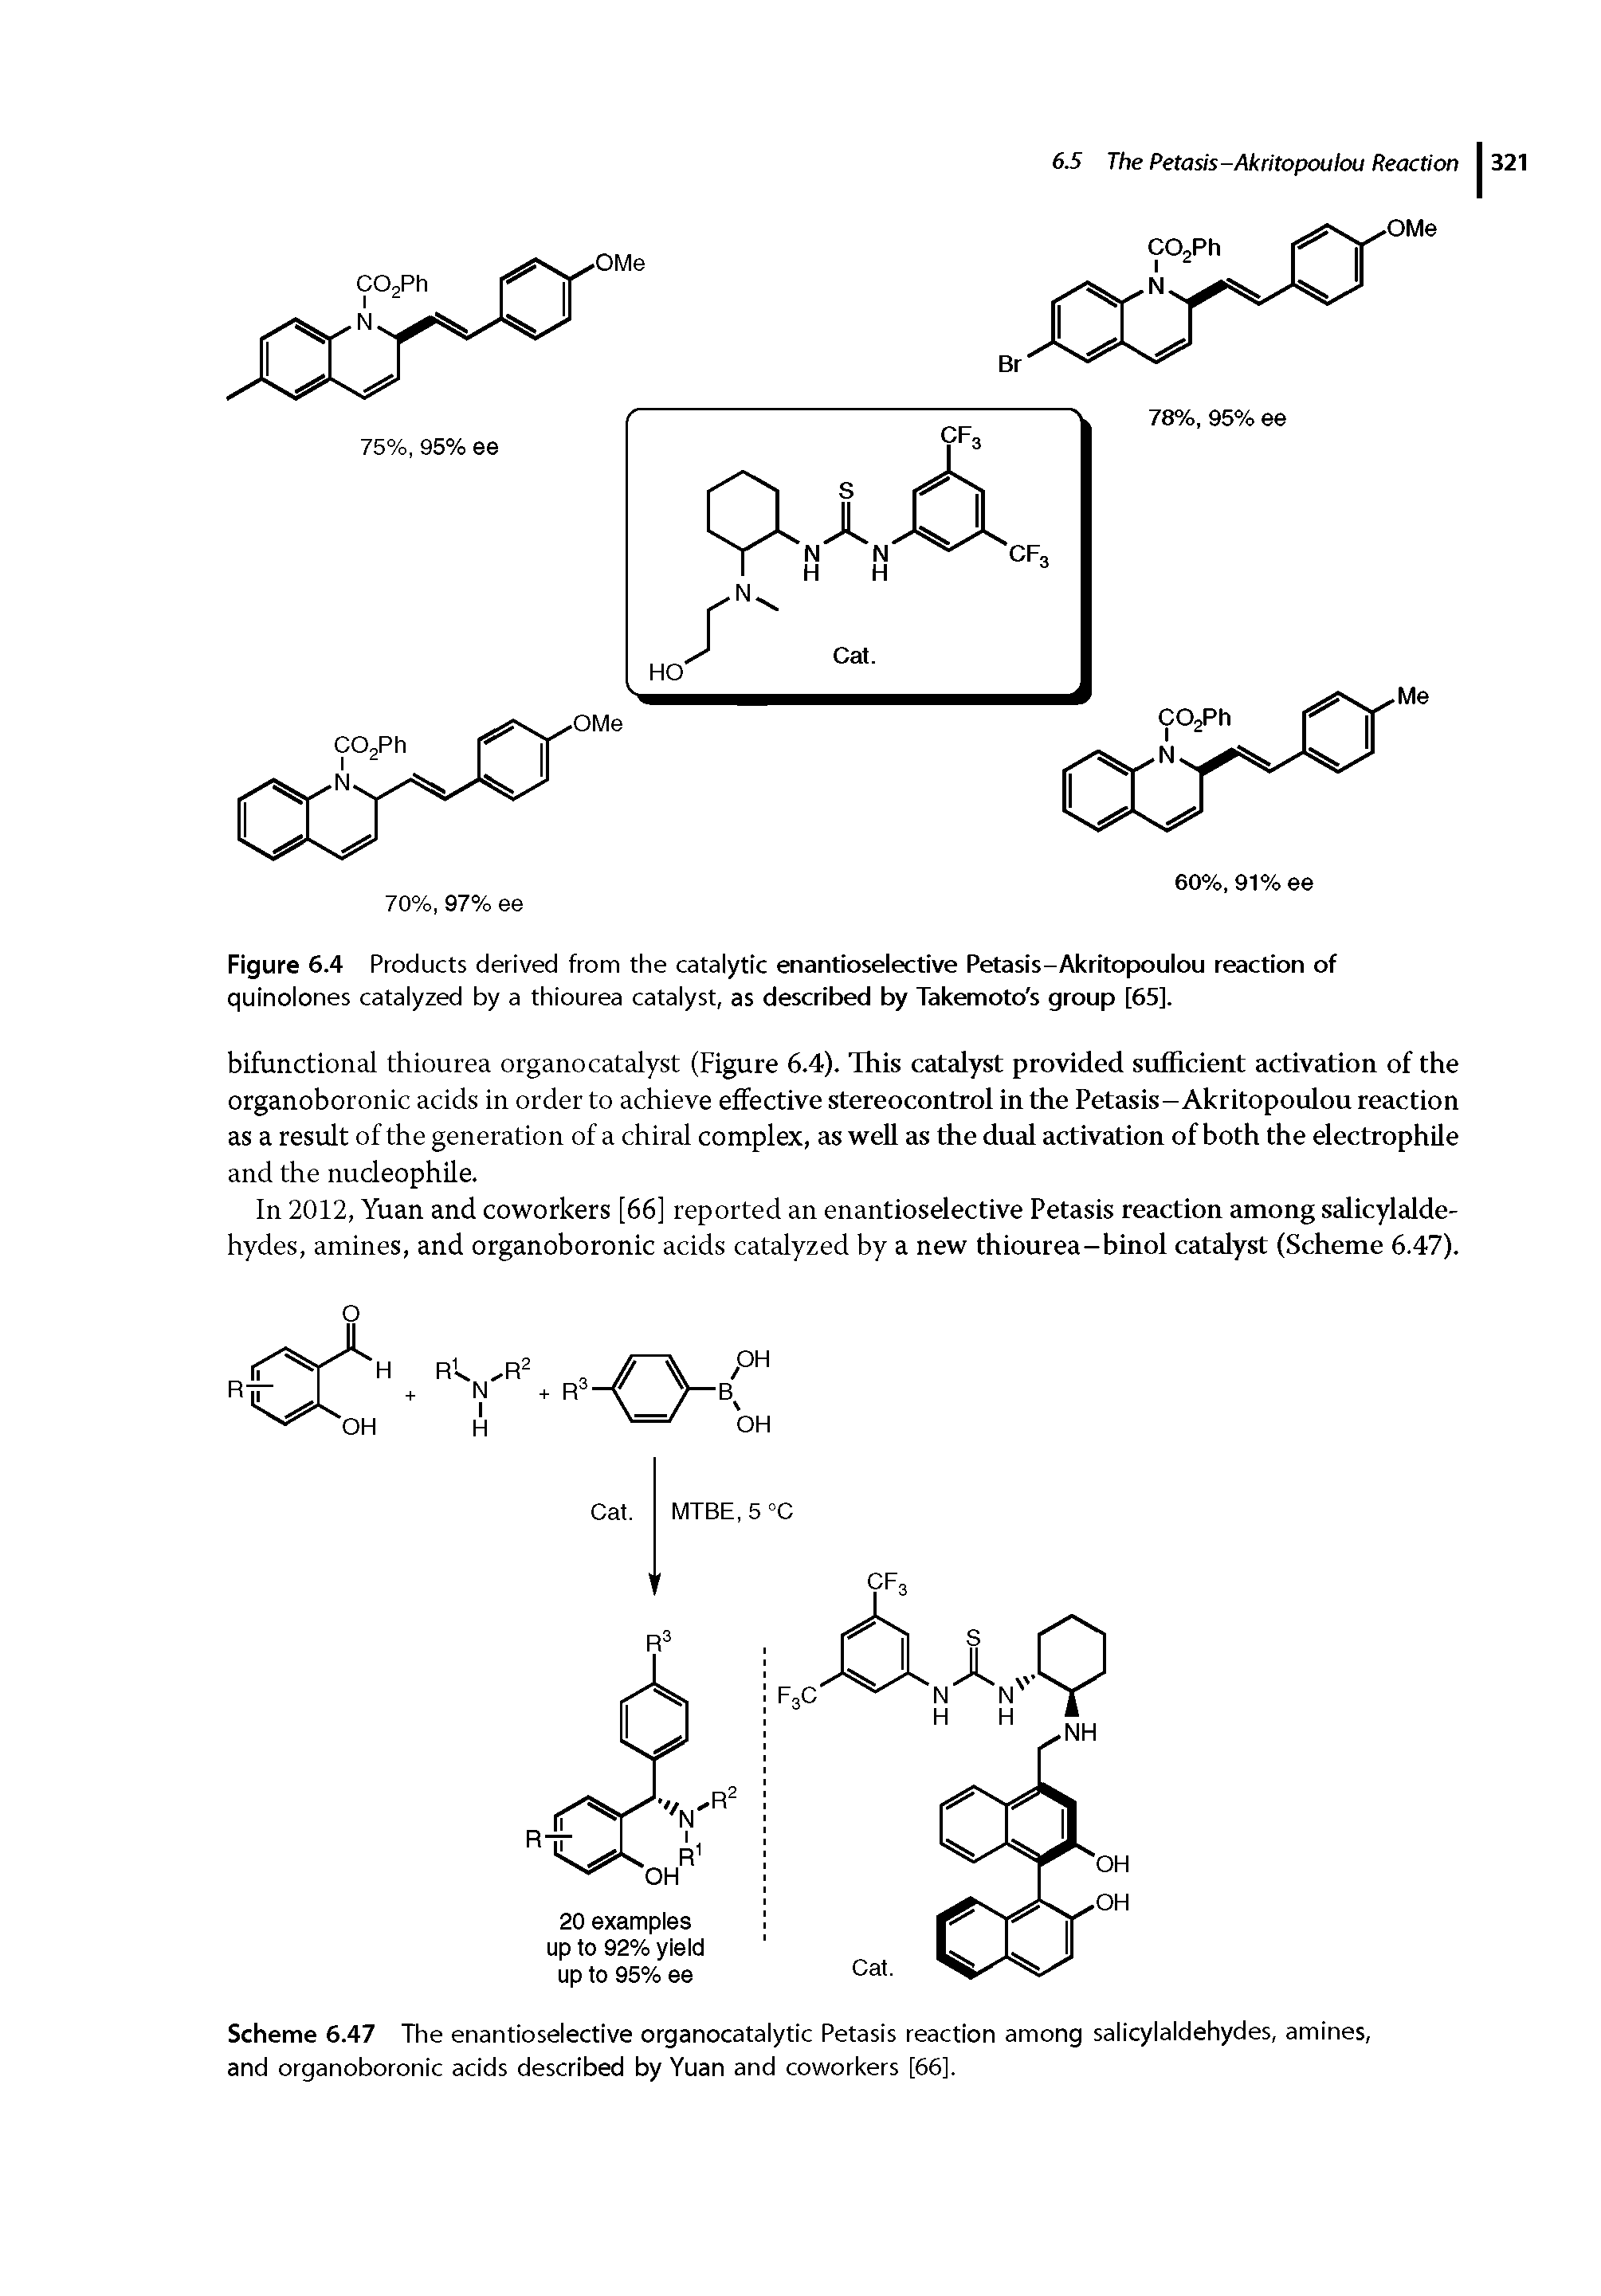 Figure 6.4 Products derived from the catalytic enantioselective Petasis-Akritopoulou reaction of quinolones catalyzed by a thiourea catalyst, as described by Takemoto s group [65].